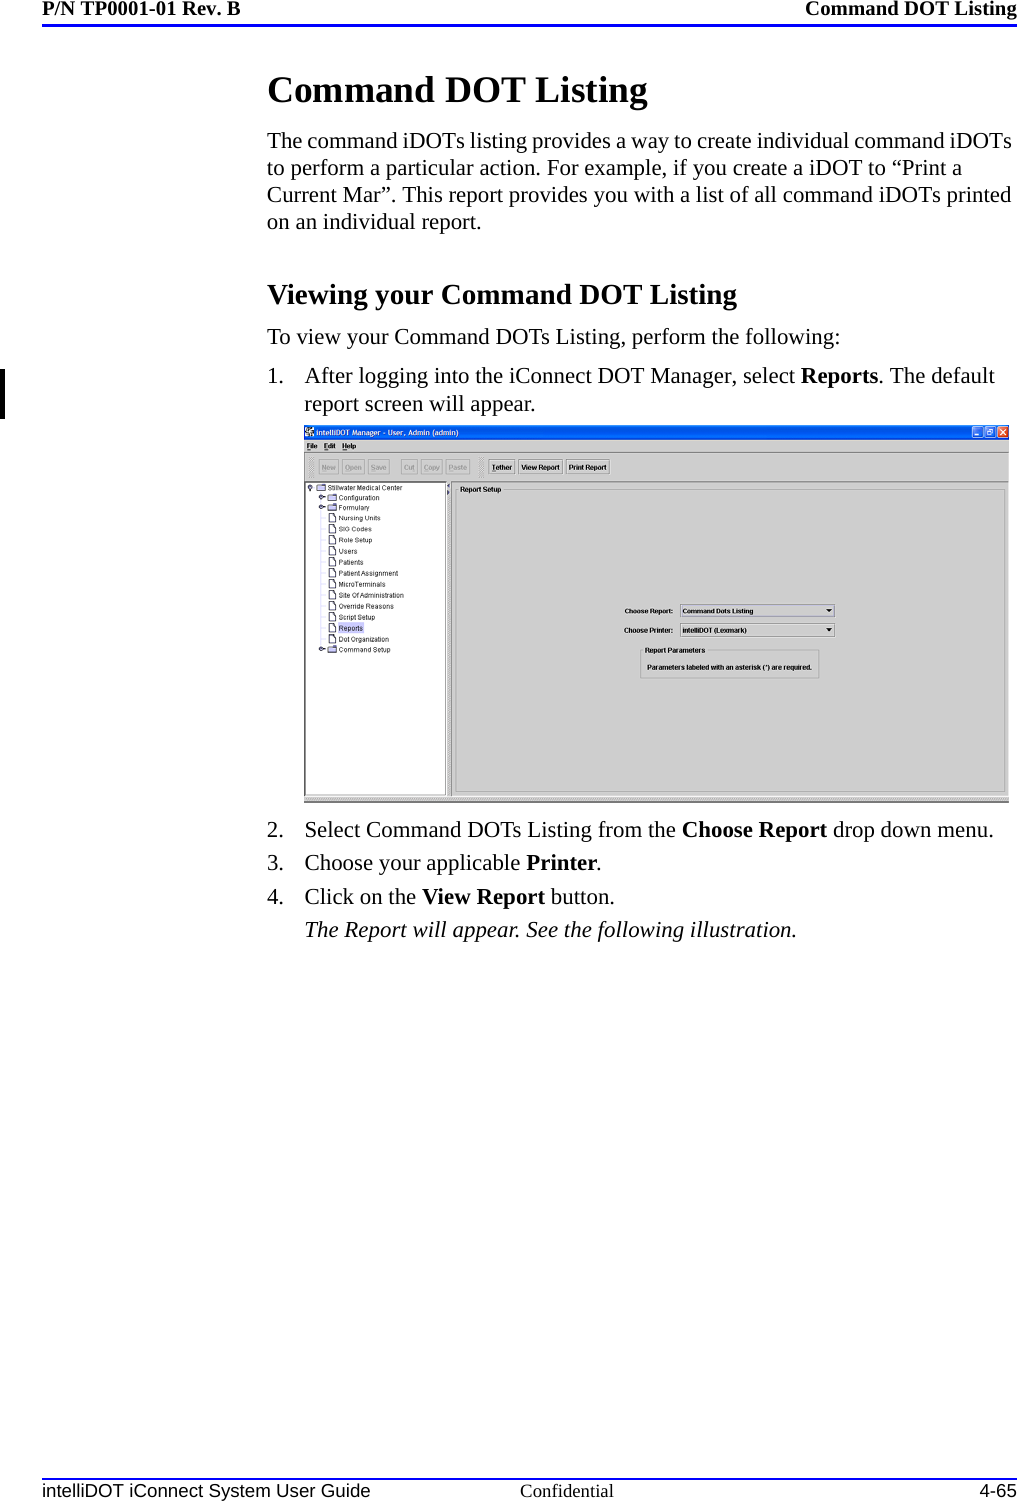 P/N TP0001-01 Rev. B Command DOT ListingintelliDOT iConnect System User Guide Confidential 4-65Command DOT ListingThe command iDOTs listing provides a way to create individual command iDOTs to perform a particular action. For example, if you create a iDOT to “Print a Current Mar”. This report provides you with a list of all command iDOTs printed on an individual report.Viewing your Command DOT ListingTo view your Command DOTs Listing, perform the following:1. After logging into the iConnect DOT Manager, select Reports. The default report screen will appear.2. Select Command DOTs Listing from the Choose Report drop down menu.3. Choose your applicable Printer.4. Click on the View Report button.The Report will appear. See the following illustration.